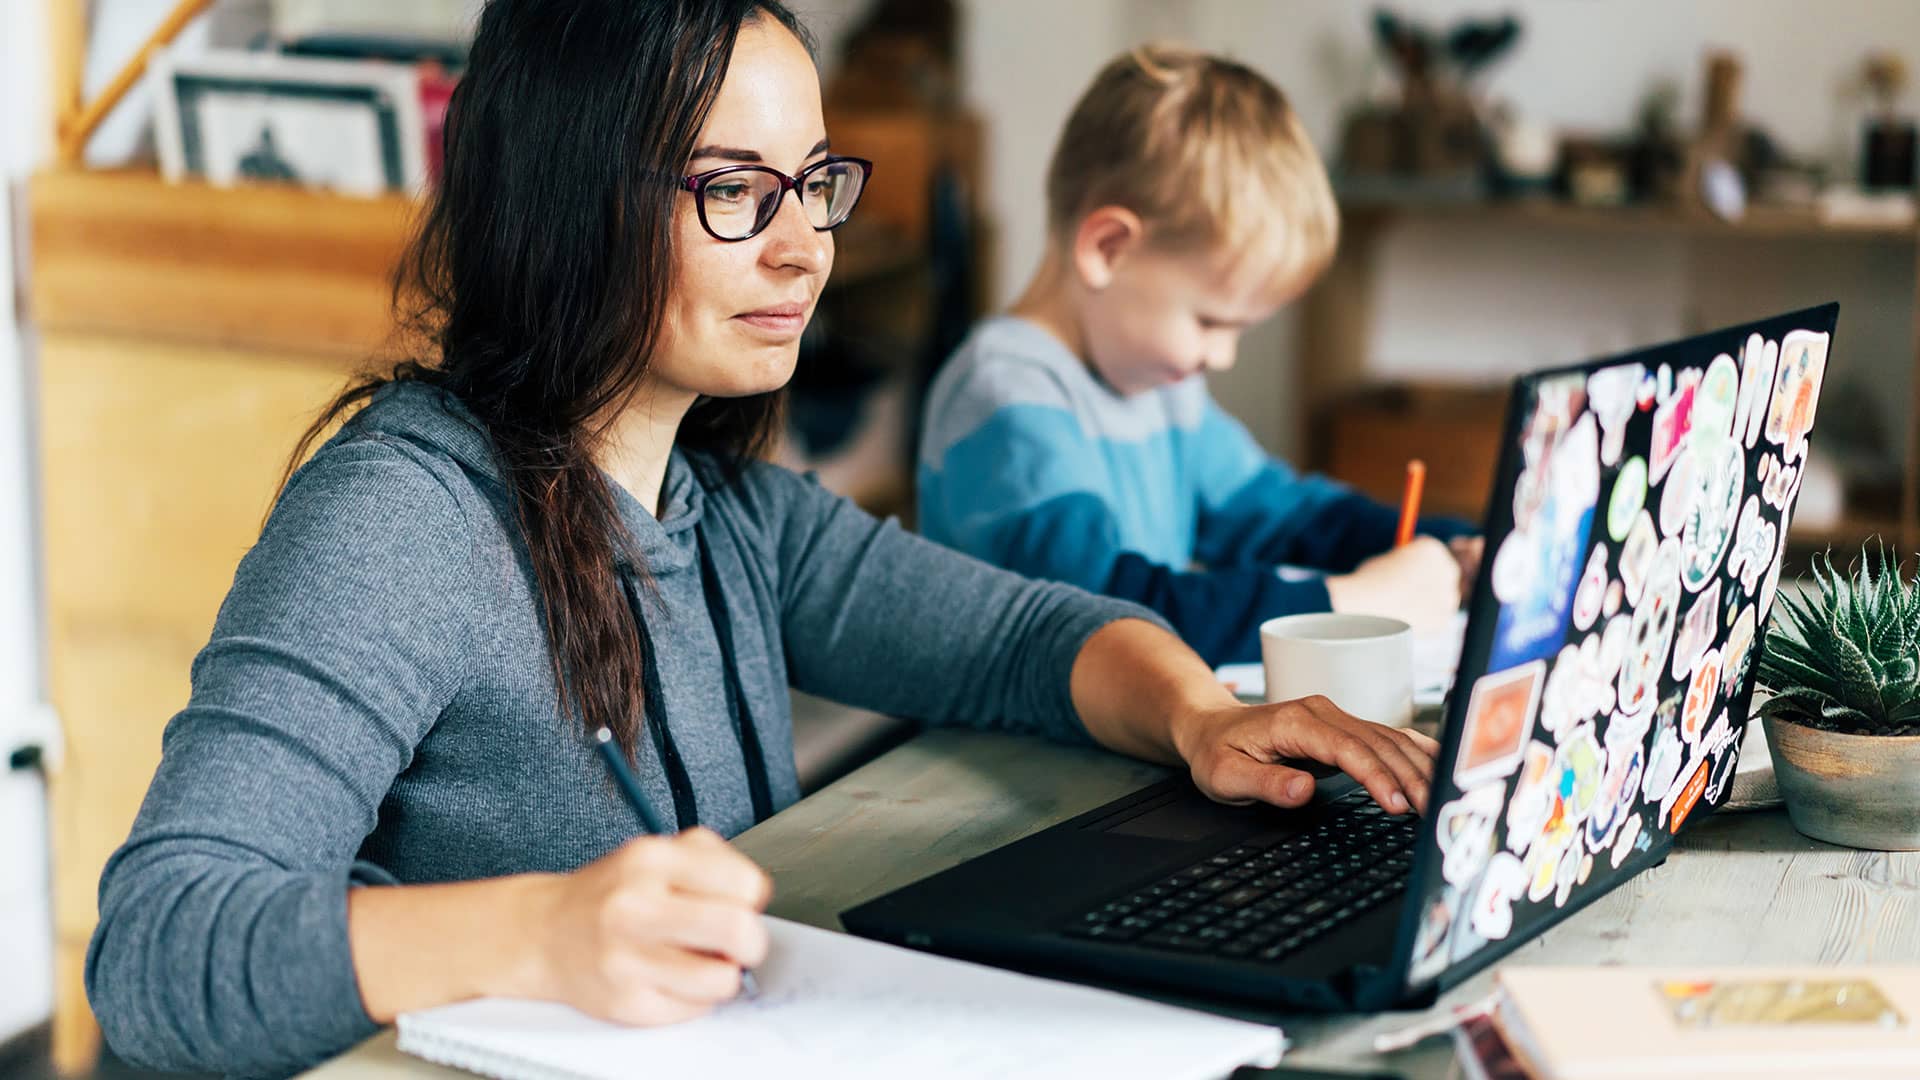 Balancing Working from Home with Childcare and Home Learning